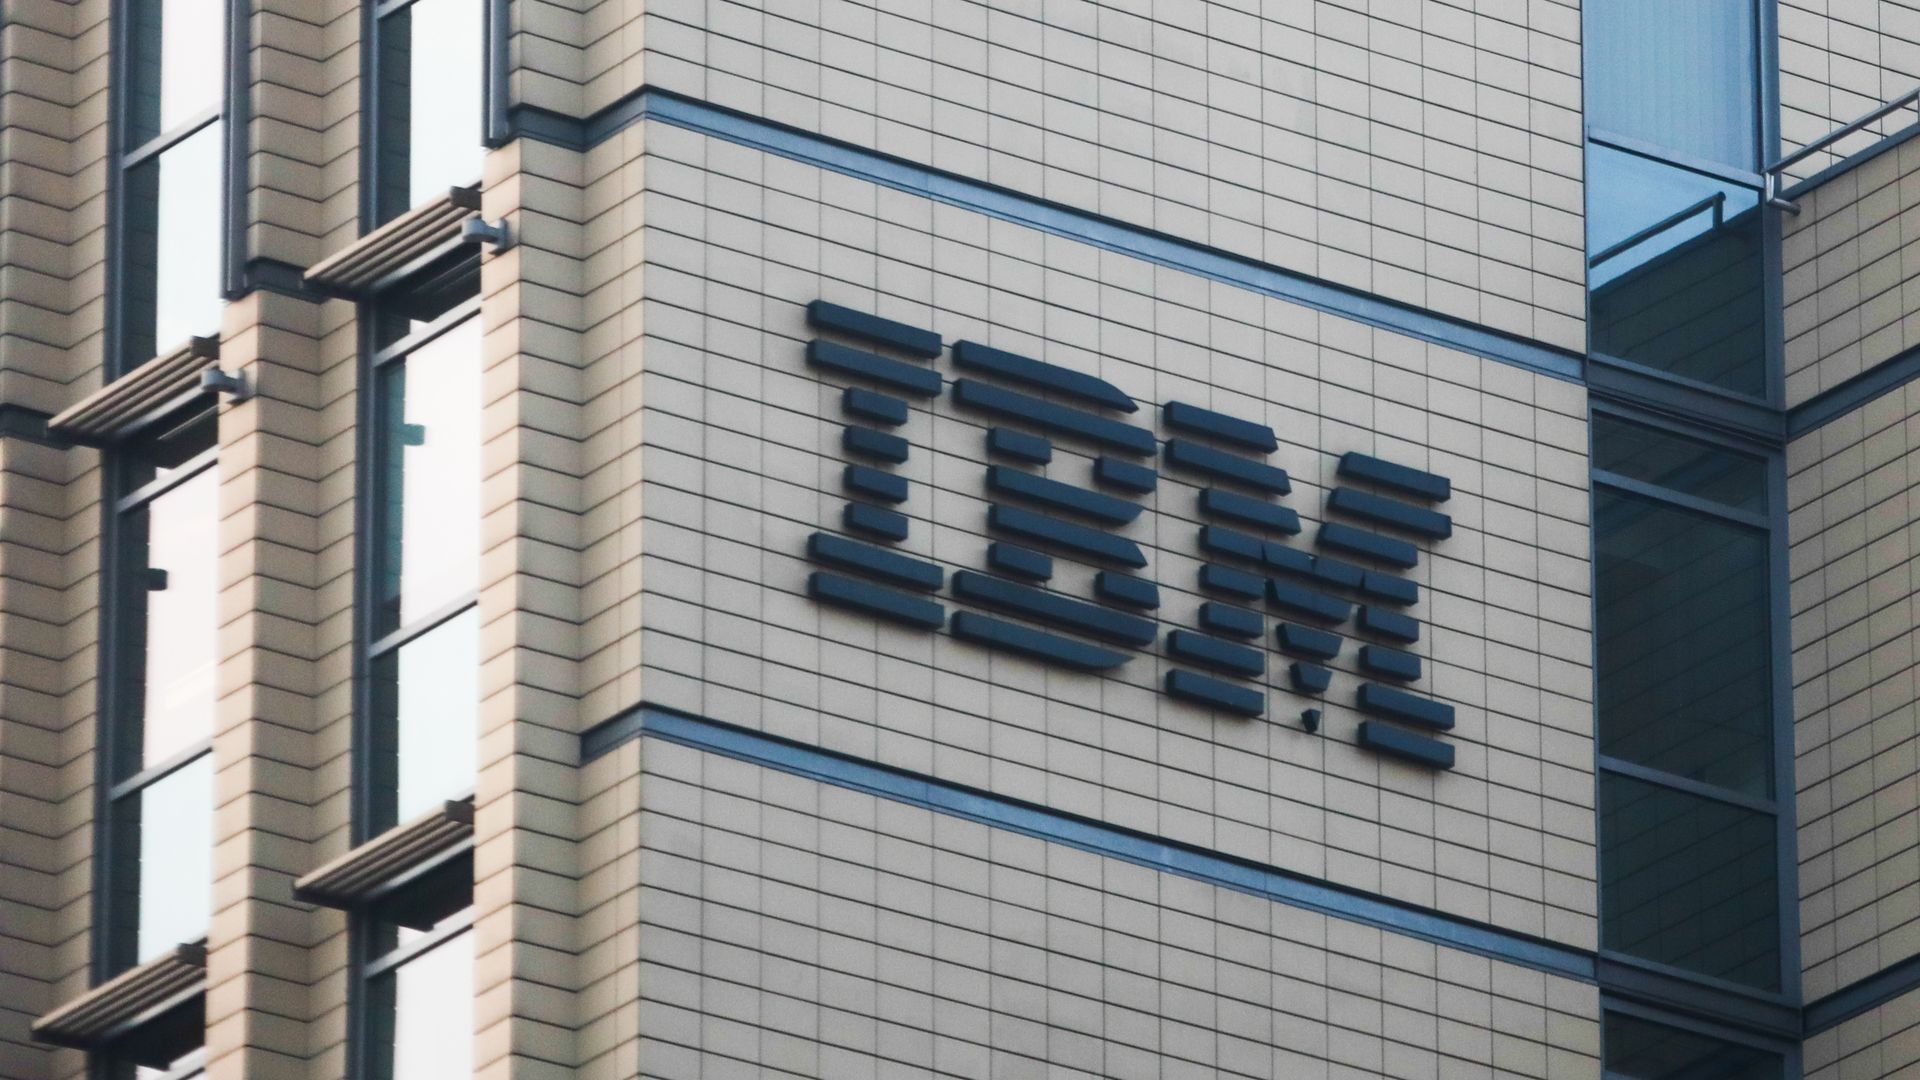 Photo of an IBM logo on the side of a building